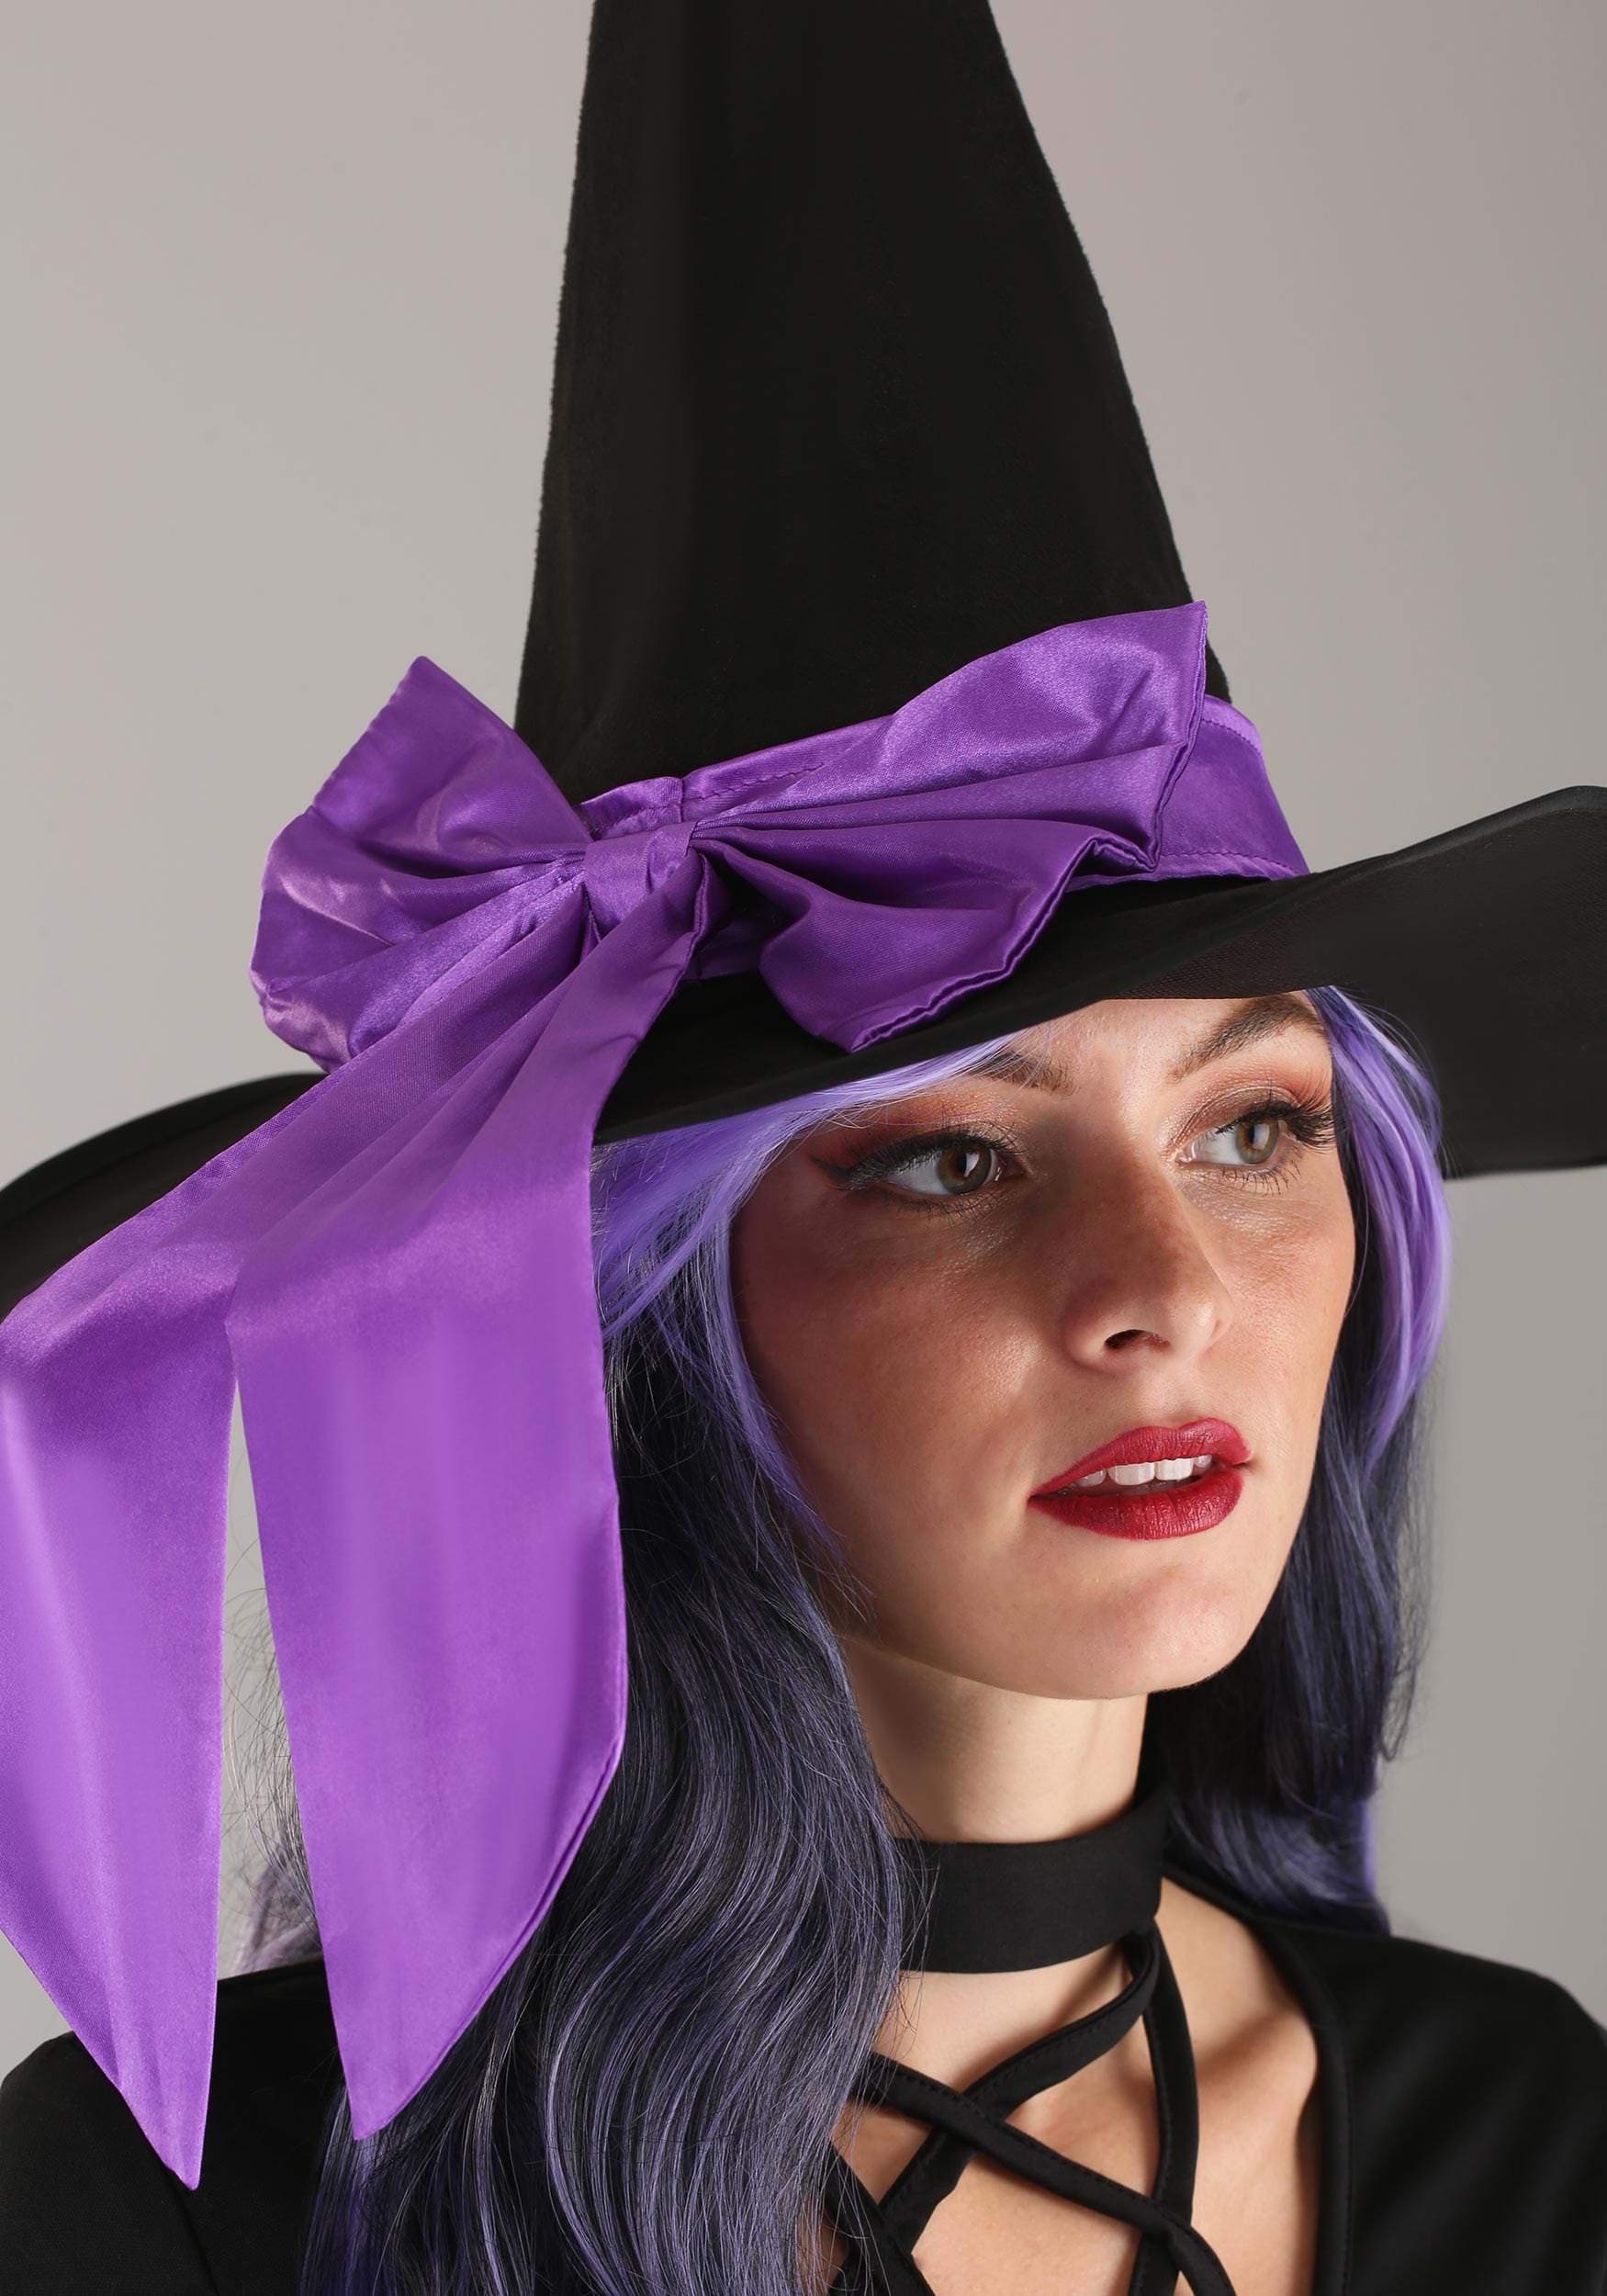 New Purpl+Black Women Party Witch Hat For Halloween Costume Accessory Decoration 